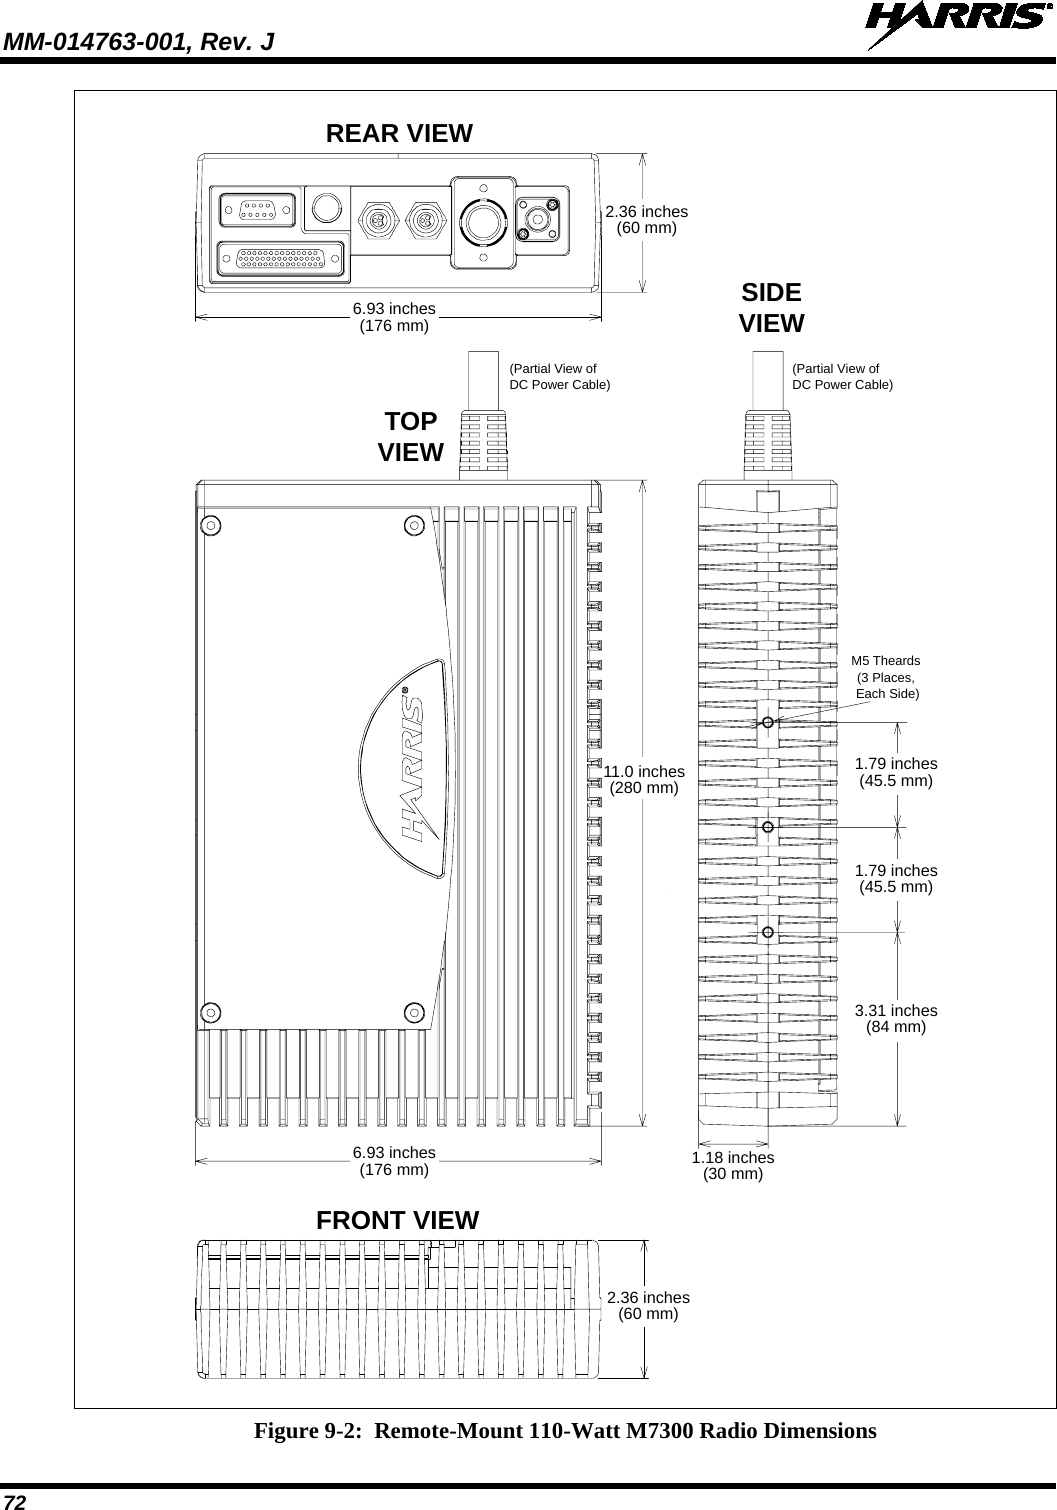 MM-014763-001, Rev. J   72    Figure 9-2:  Remote-Mount 110-Watt M7300 Radio Dimensions 2.36 inches(60 mm)6.93 inches(176 mm)11.0 inches(280 mm)1.79 inches(45.5 mm)M5 Theards(3 Places,Each Side)1.79 inches(45.5 mm)3.31 inches(84 mm)1.18 inches(30 mm)6.93 inches(176 mm)TOPVIEWFRONT VIEWSIDEVIEWREAR VIEW(Partial View ofDC Power Cable)(Partial View ofDC Power Cable)2.36 inches(60 mm)